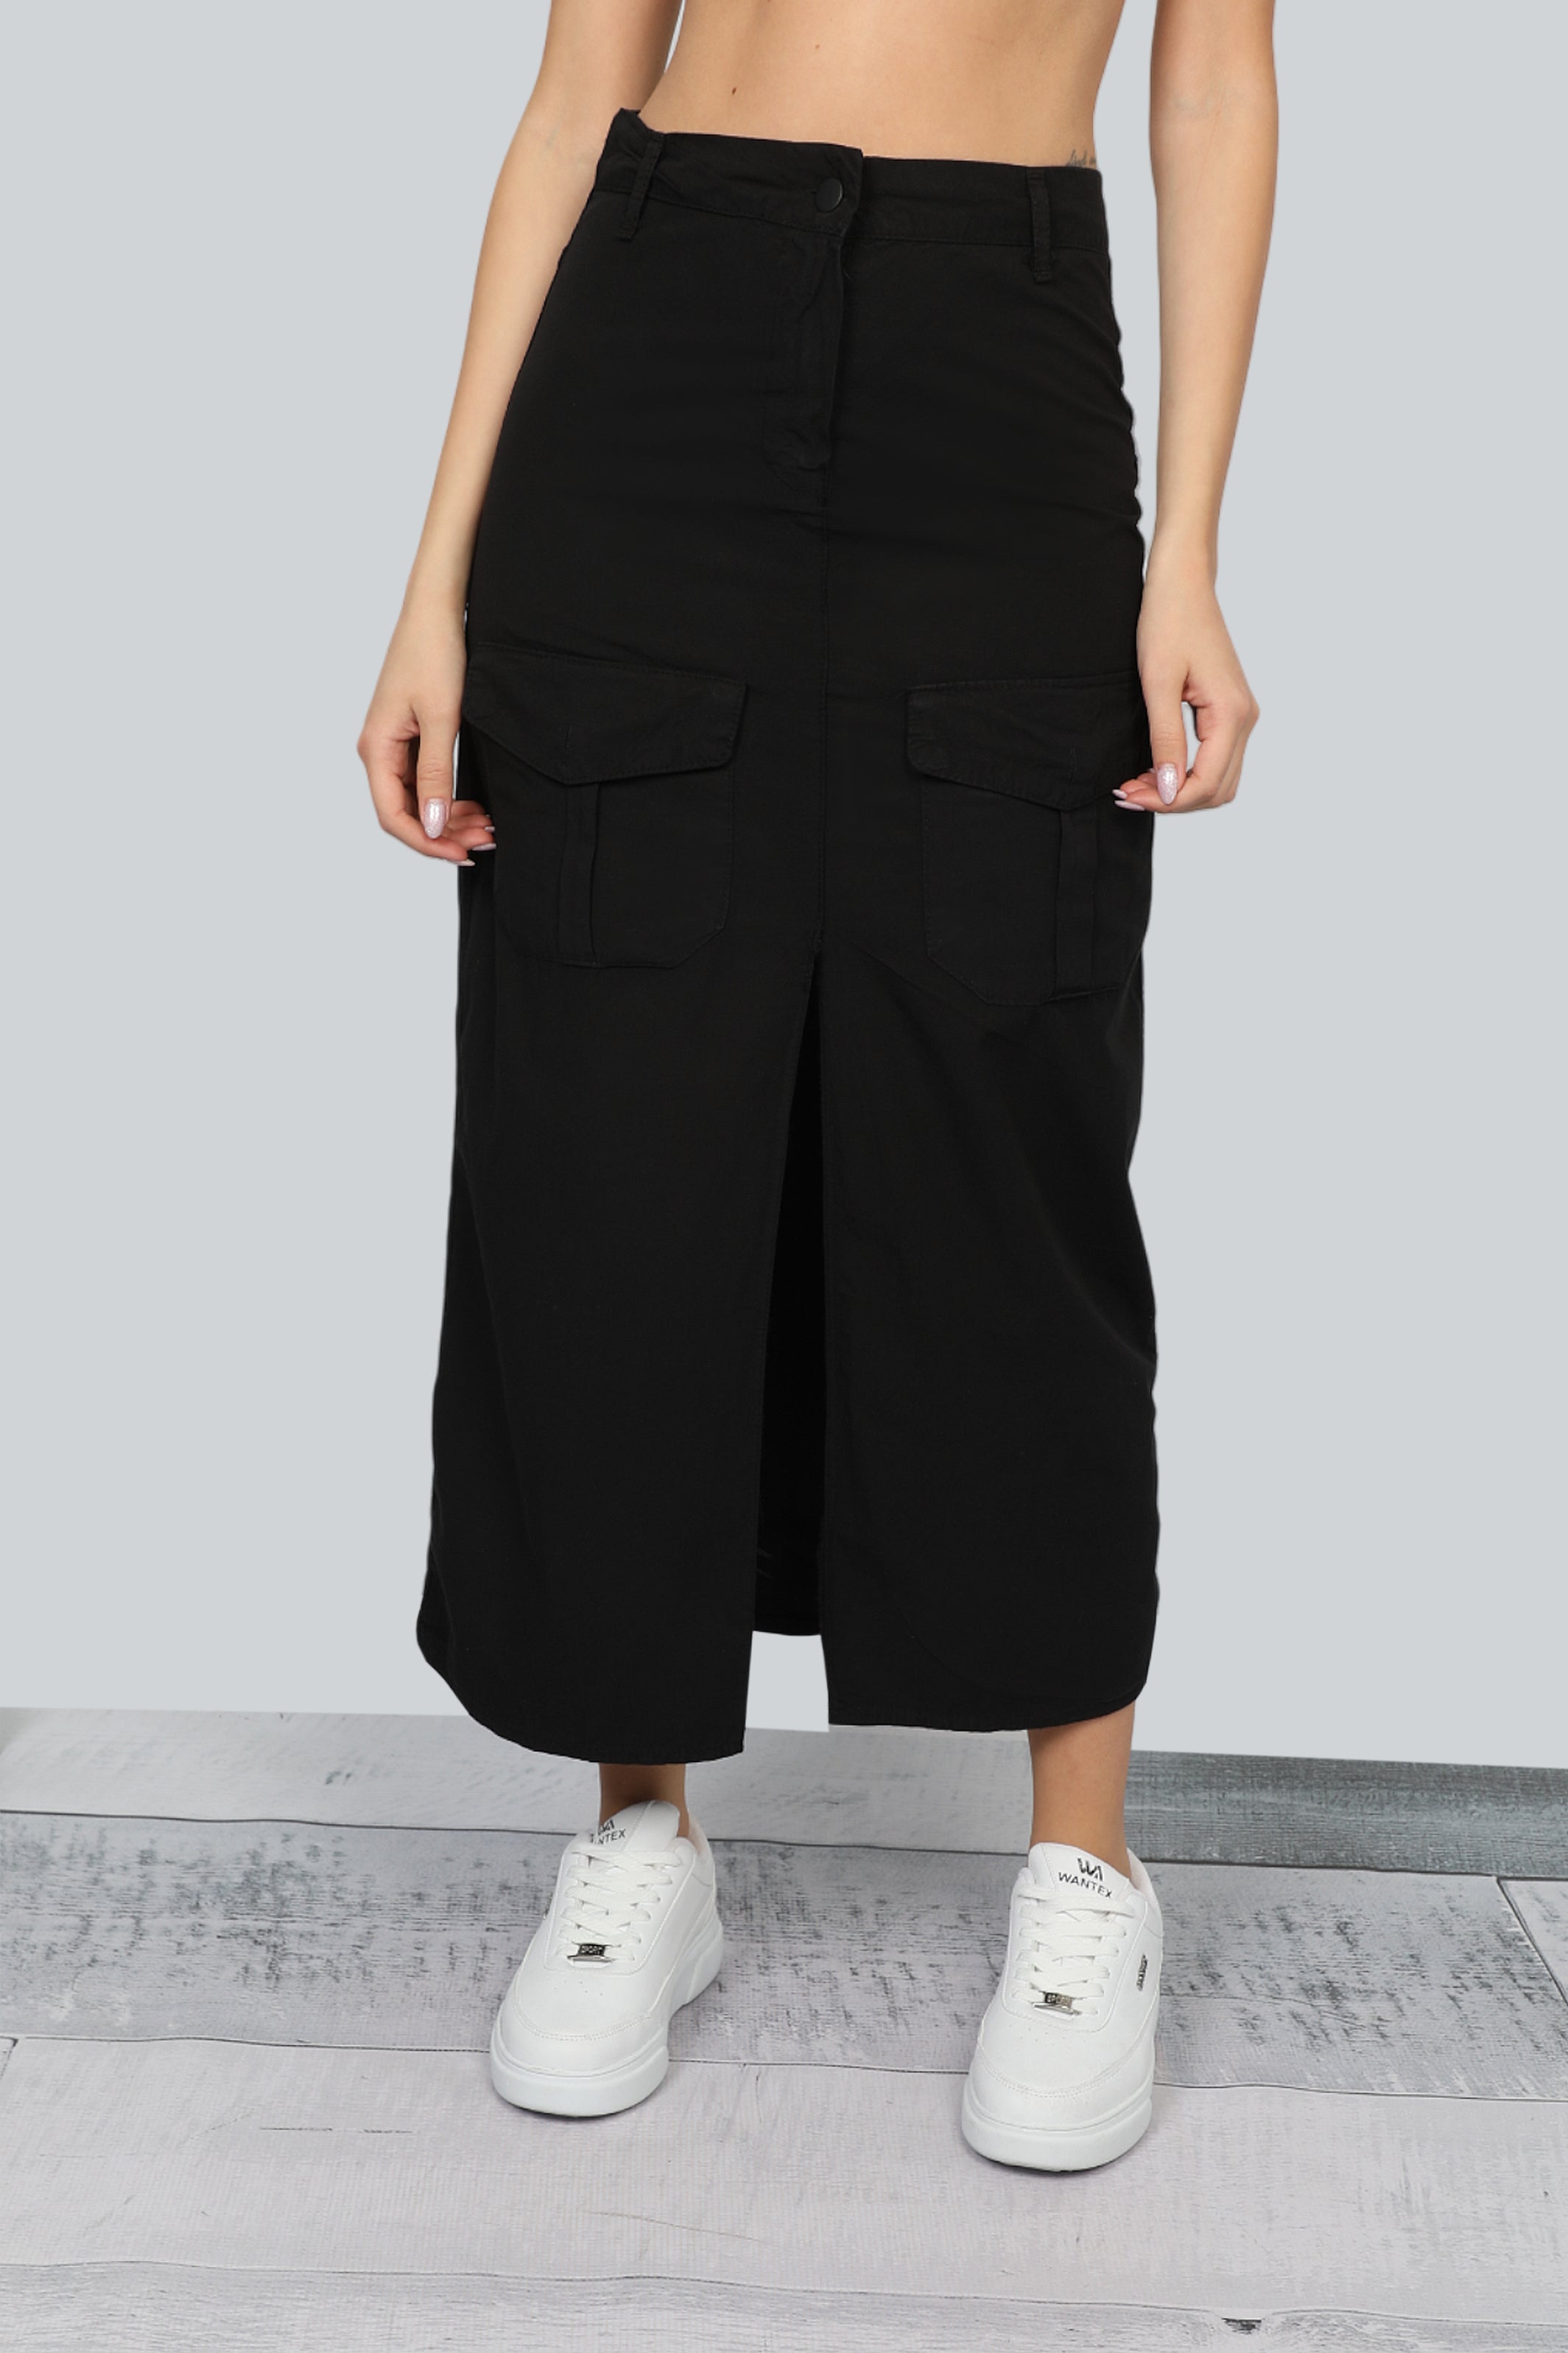 Black Long Casual Skirt With Pockets